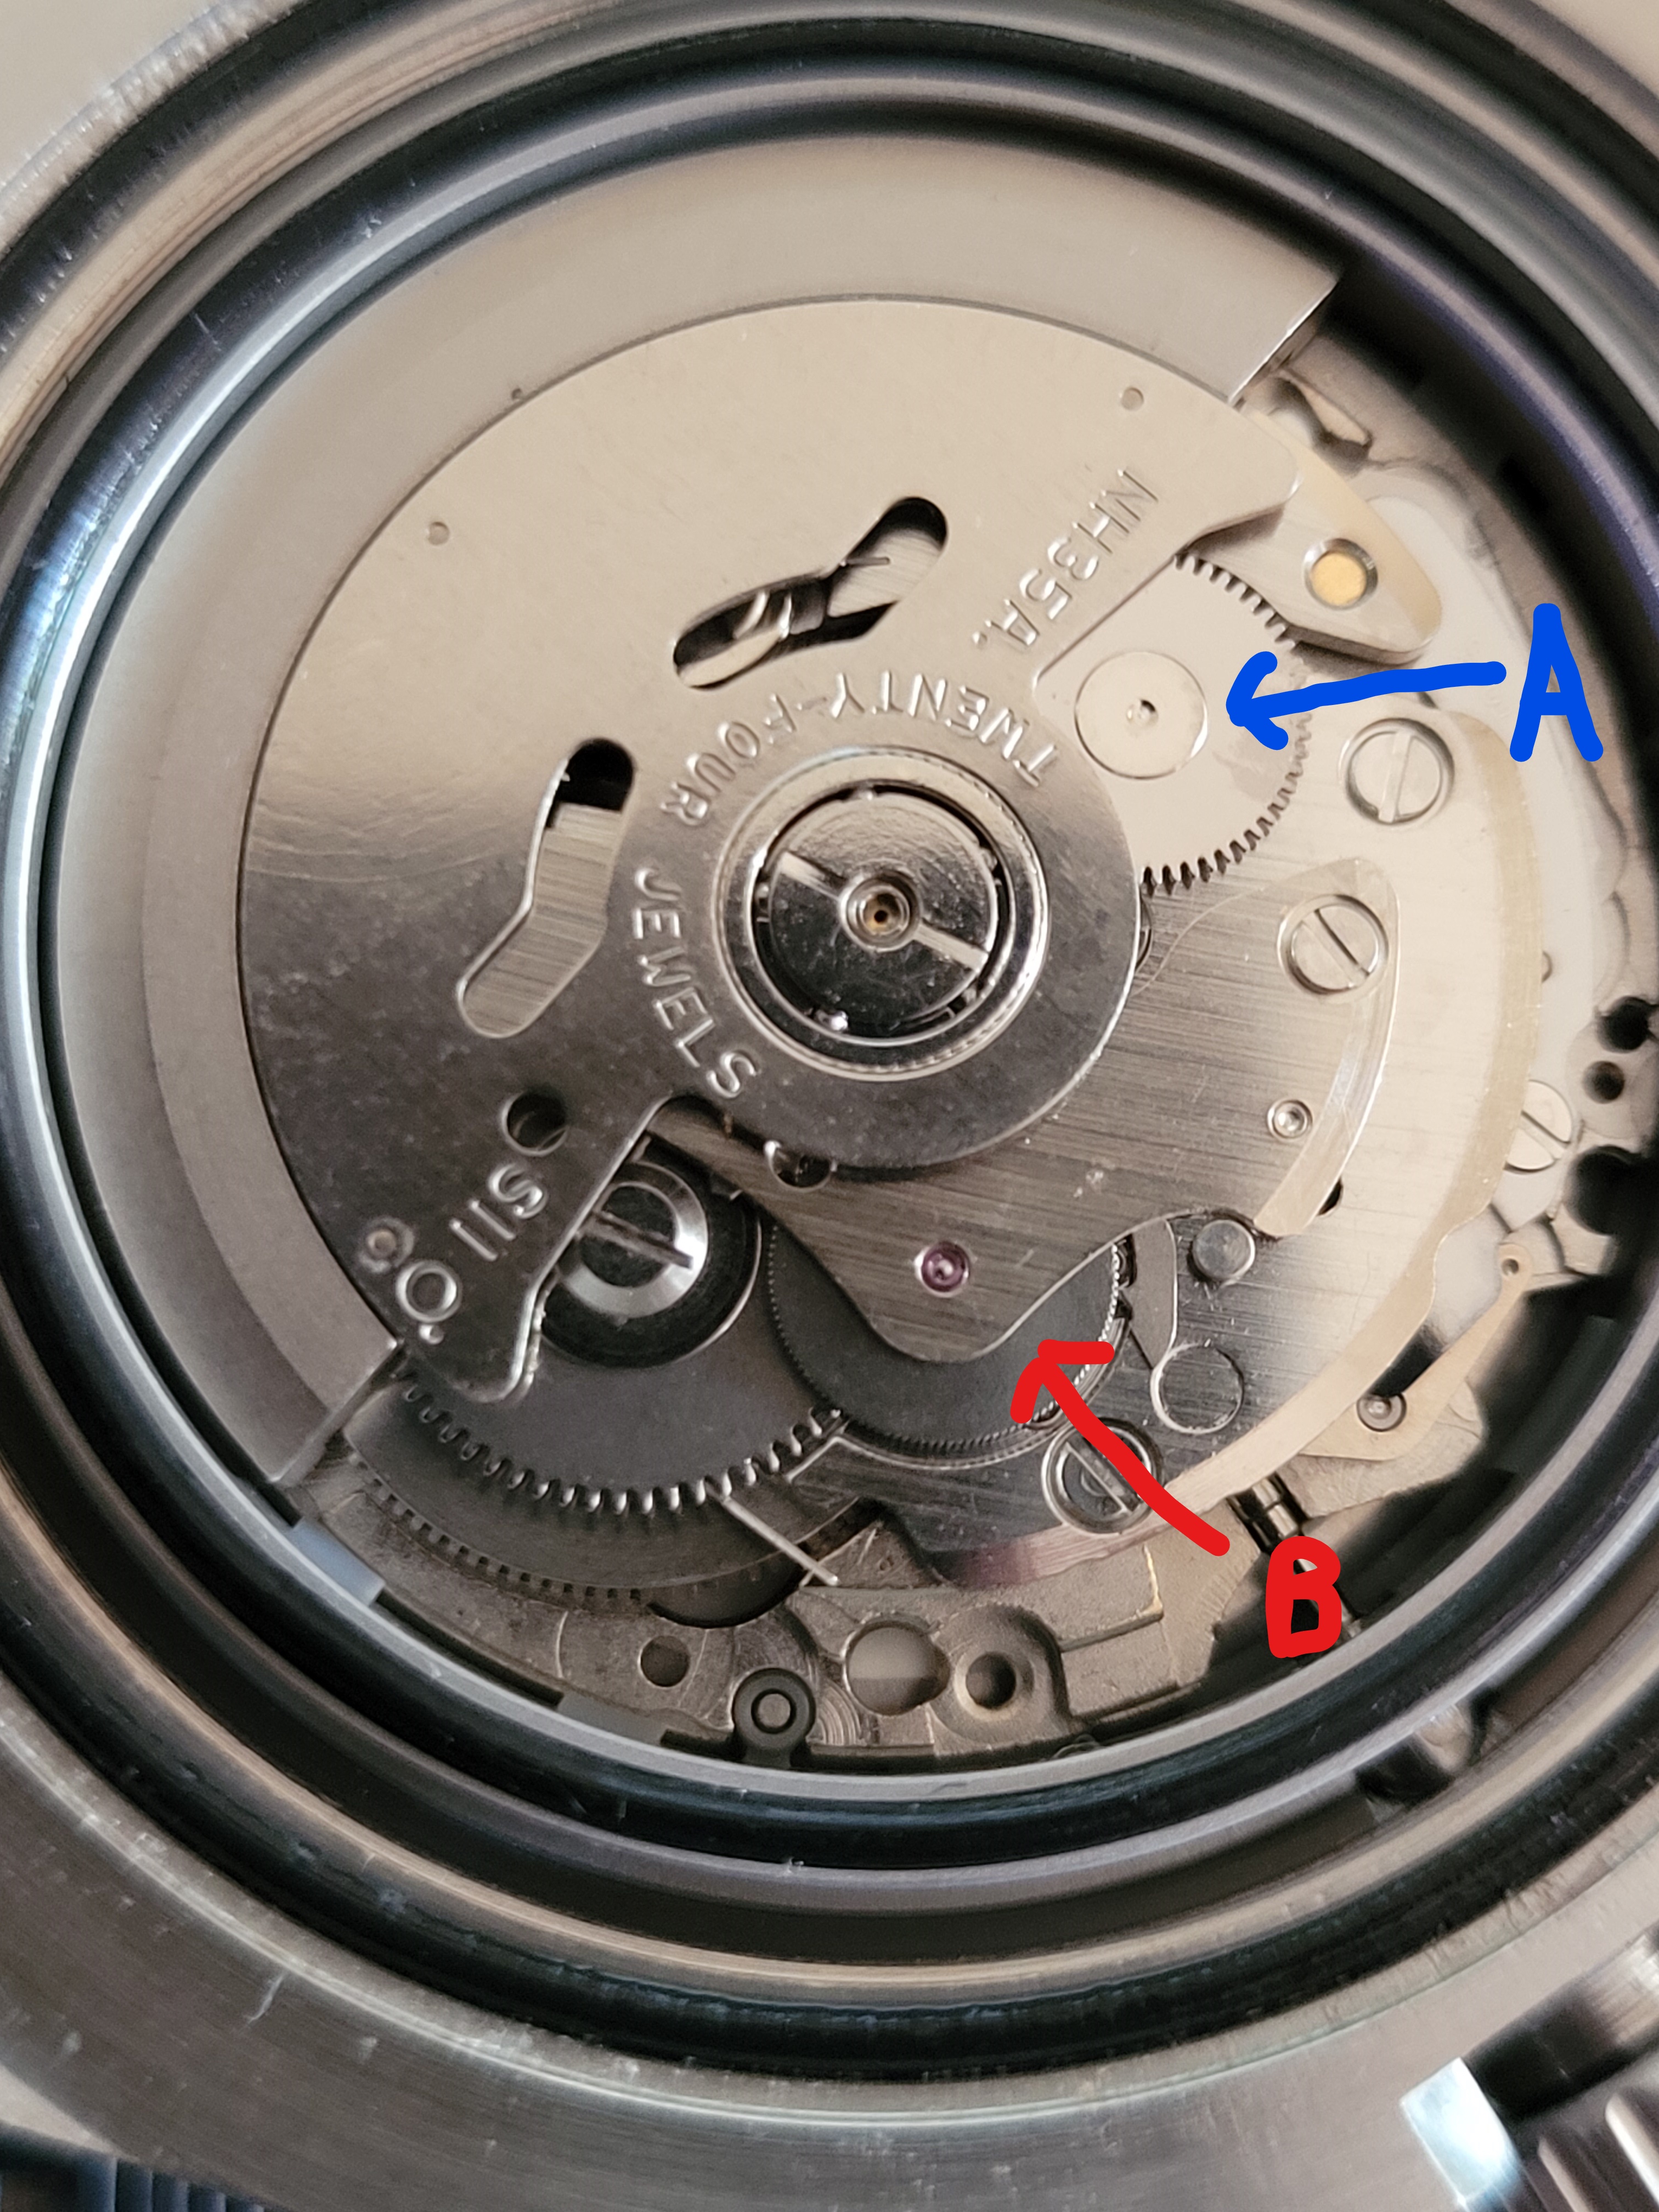 Seiko NH35 Problem - opinions please! - Watch Repair, Upgrade & Reference -  RWG: Replica Watch Guide Forum